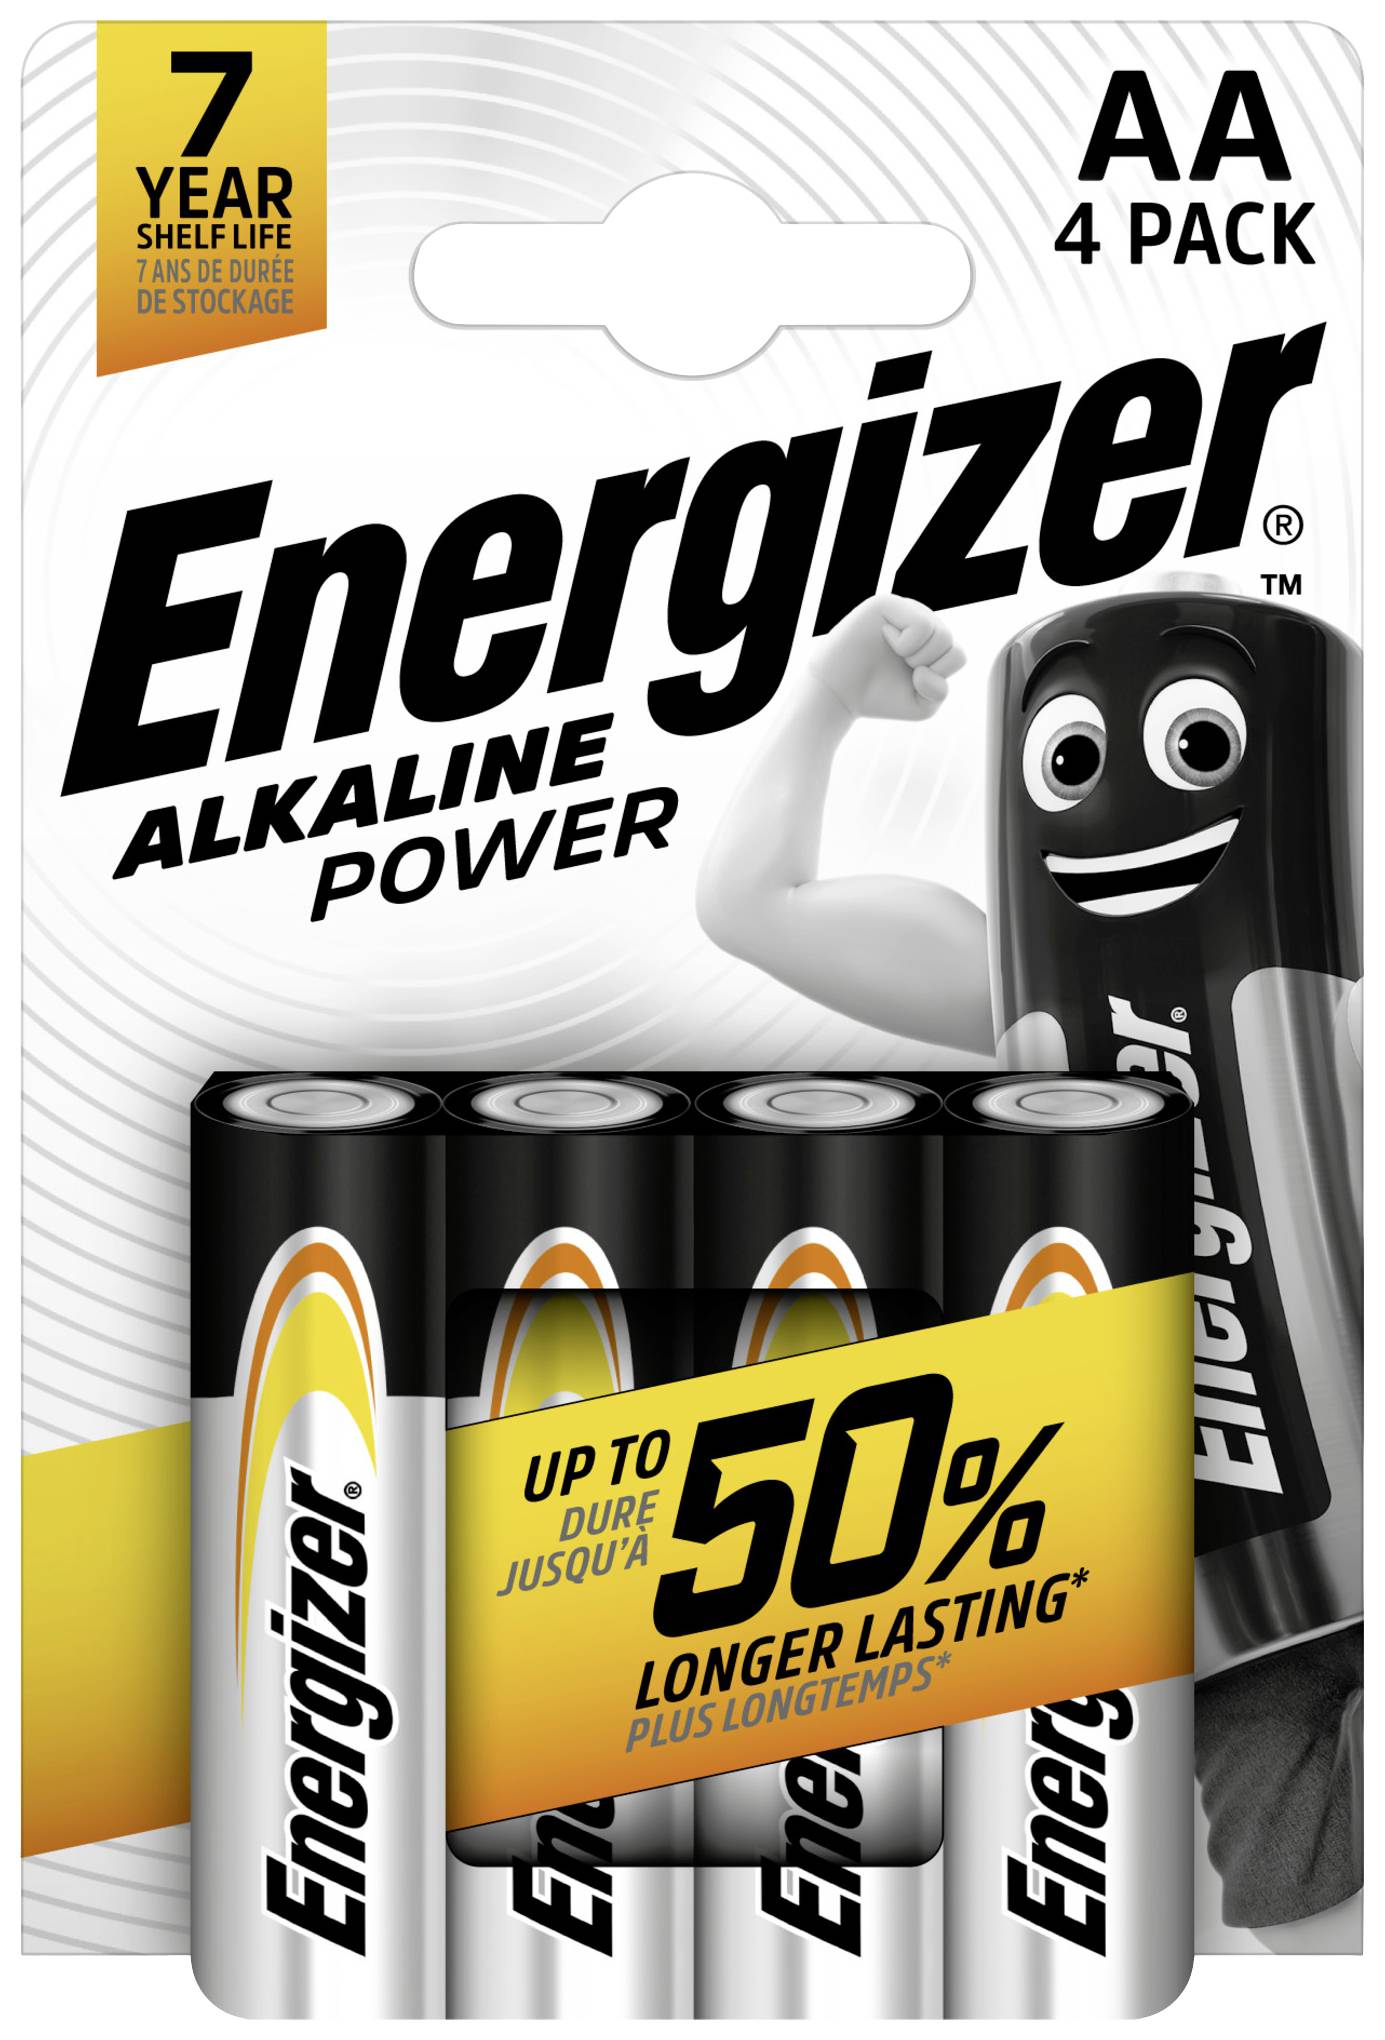 ENERGIZER Power alkaline AA/LR6 4-blister - Long lasting energy for your everyday devices.PRODUCT SP